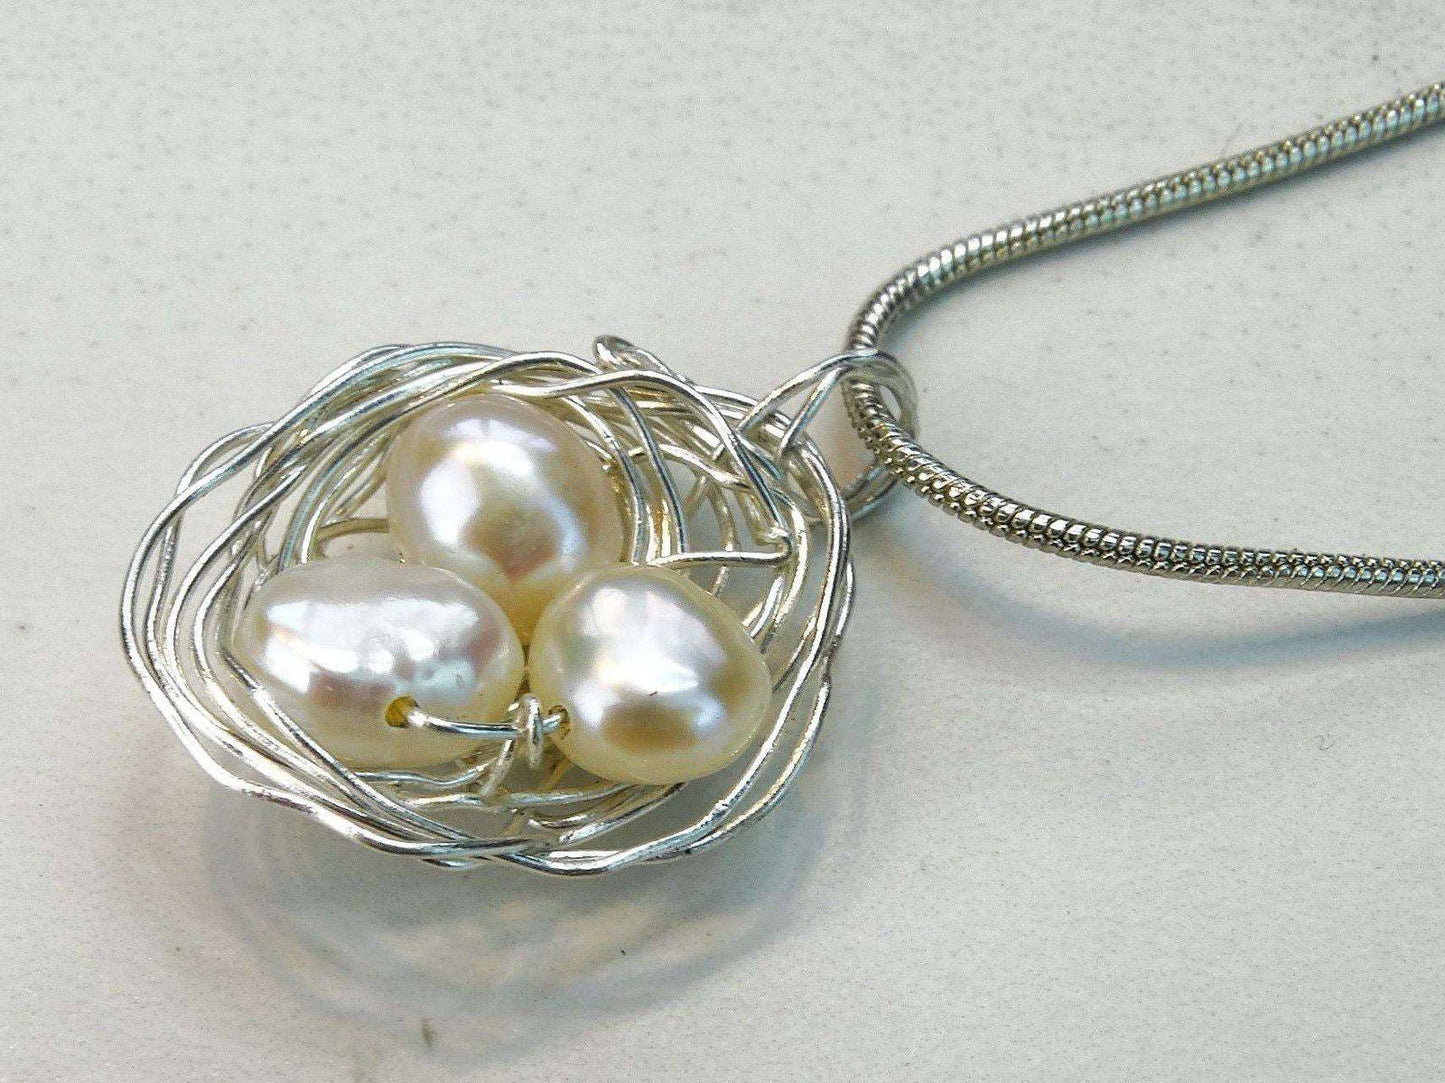 Birds nest pendant, necklace with white pearl eggs | Necklace | Louella Jewellery